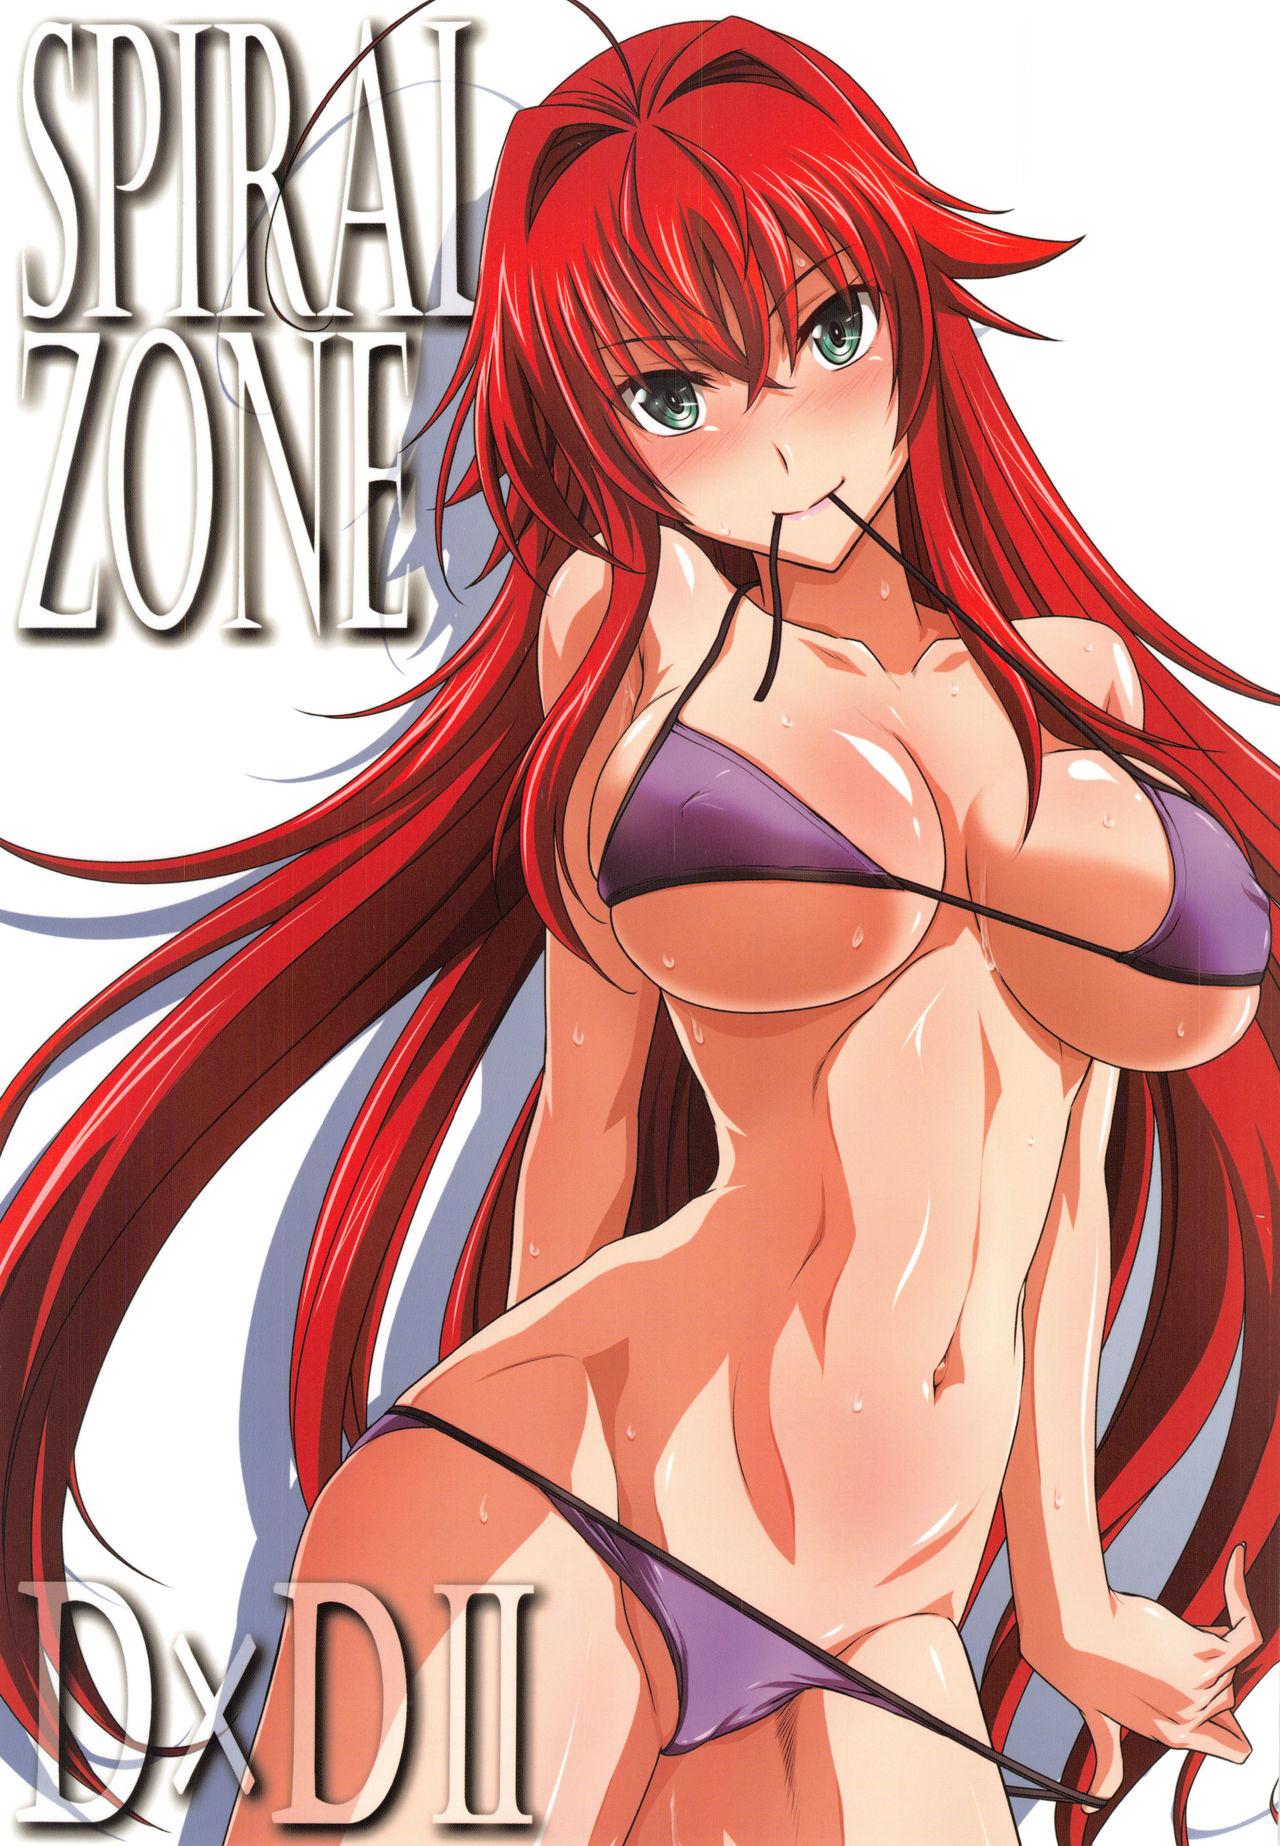 Eurosex SPIRAL ZONE DxD II - Highschool dxd Shaved Pussy - Picture 1